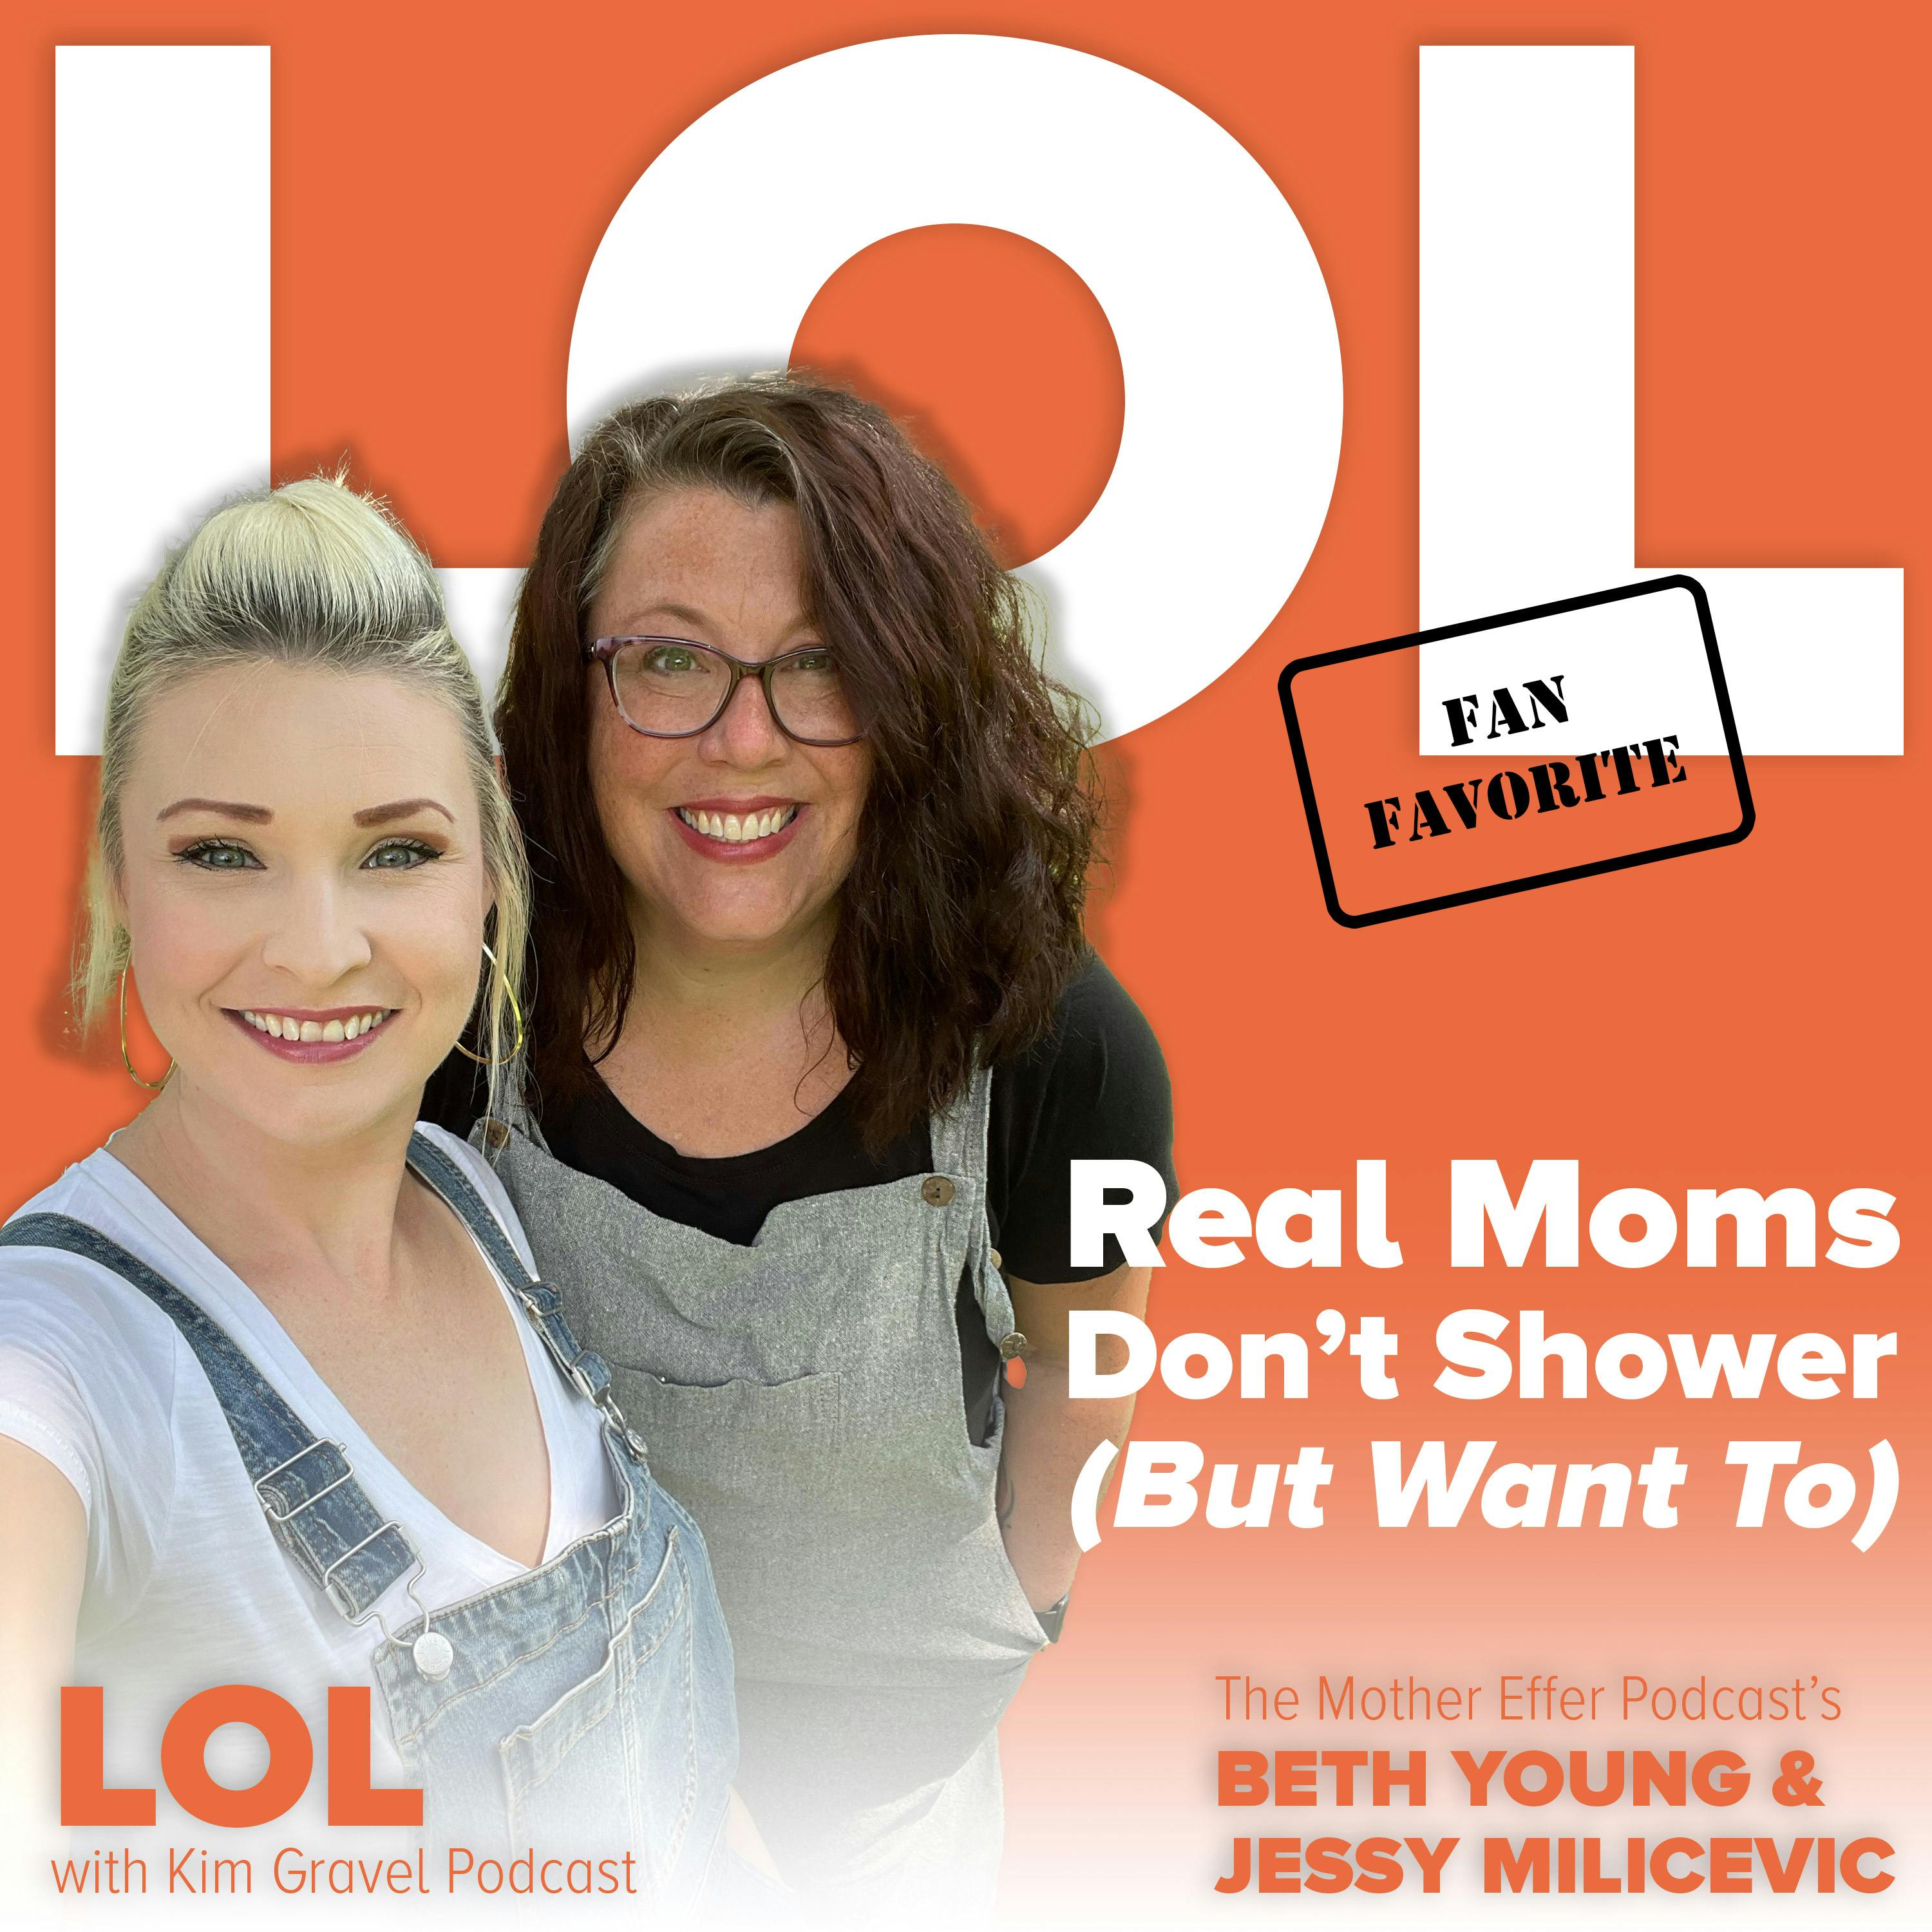 Fan Favorite: Real Moms Don’t Shower (But Want To) with Jessy and Beth Image